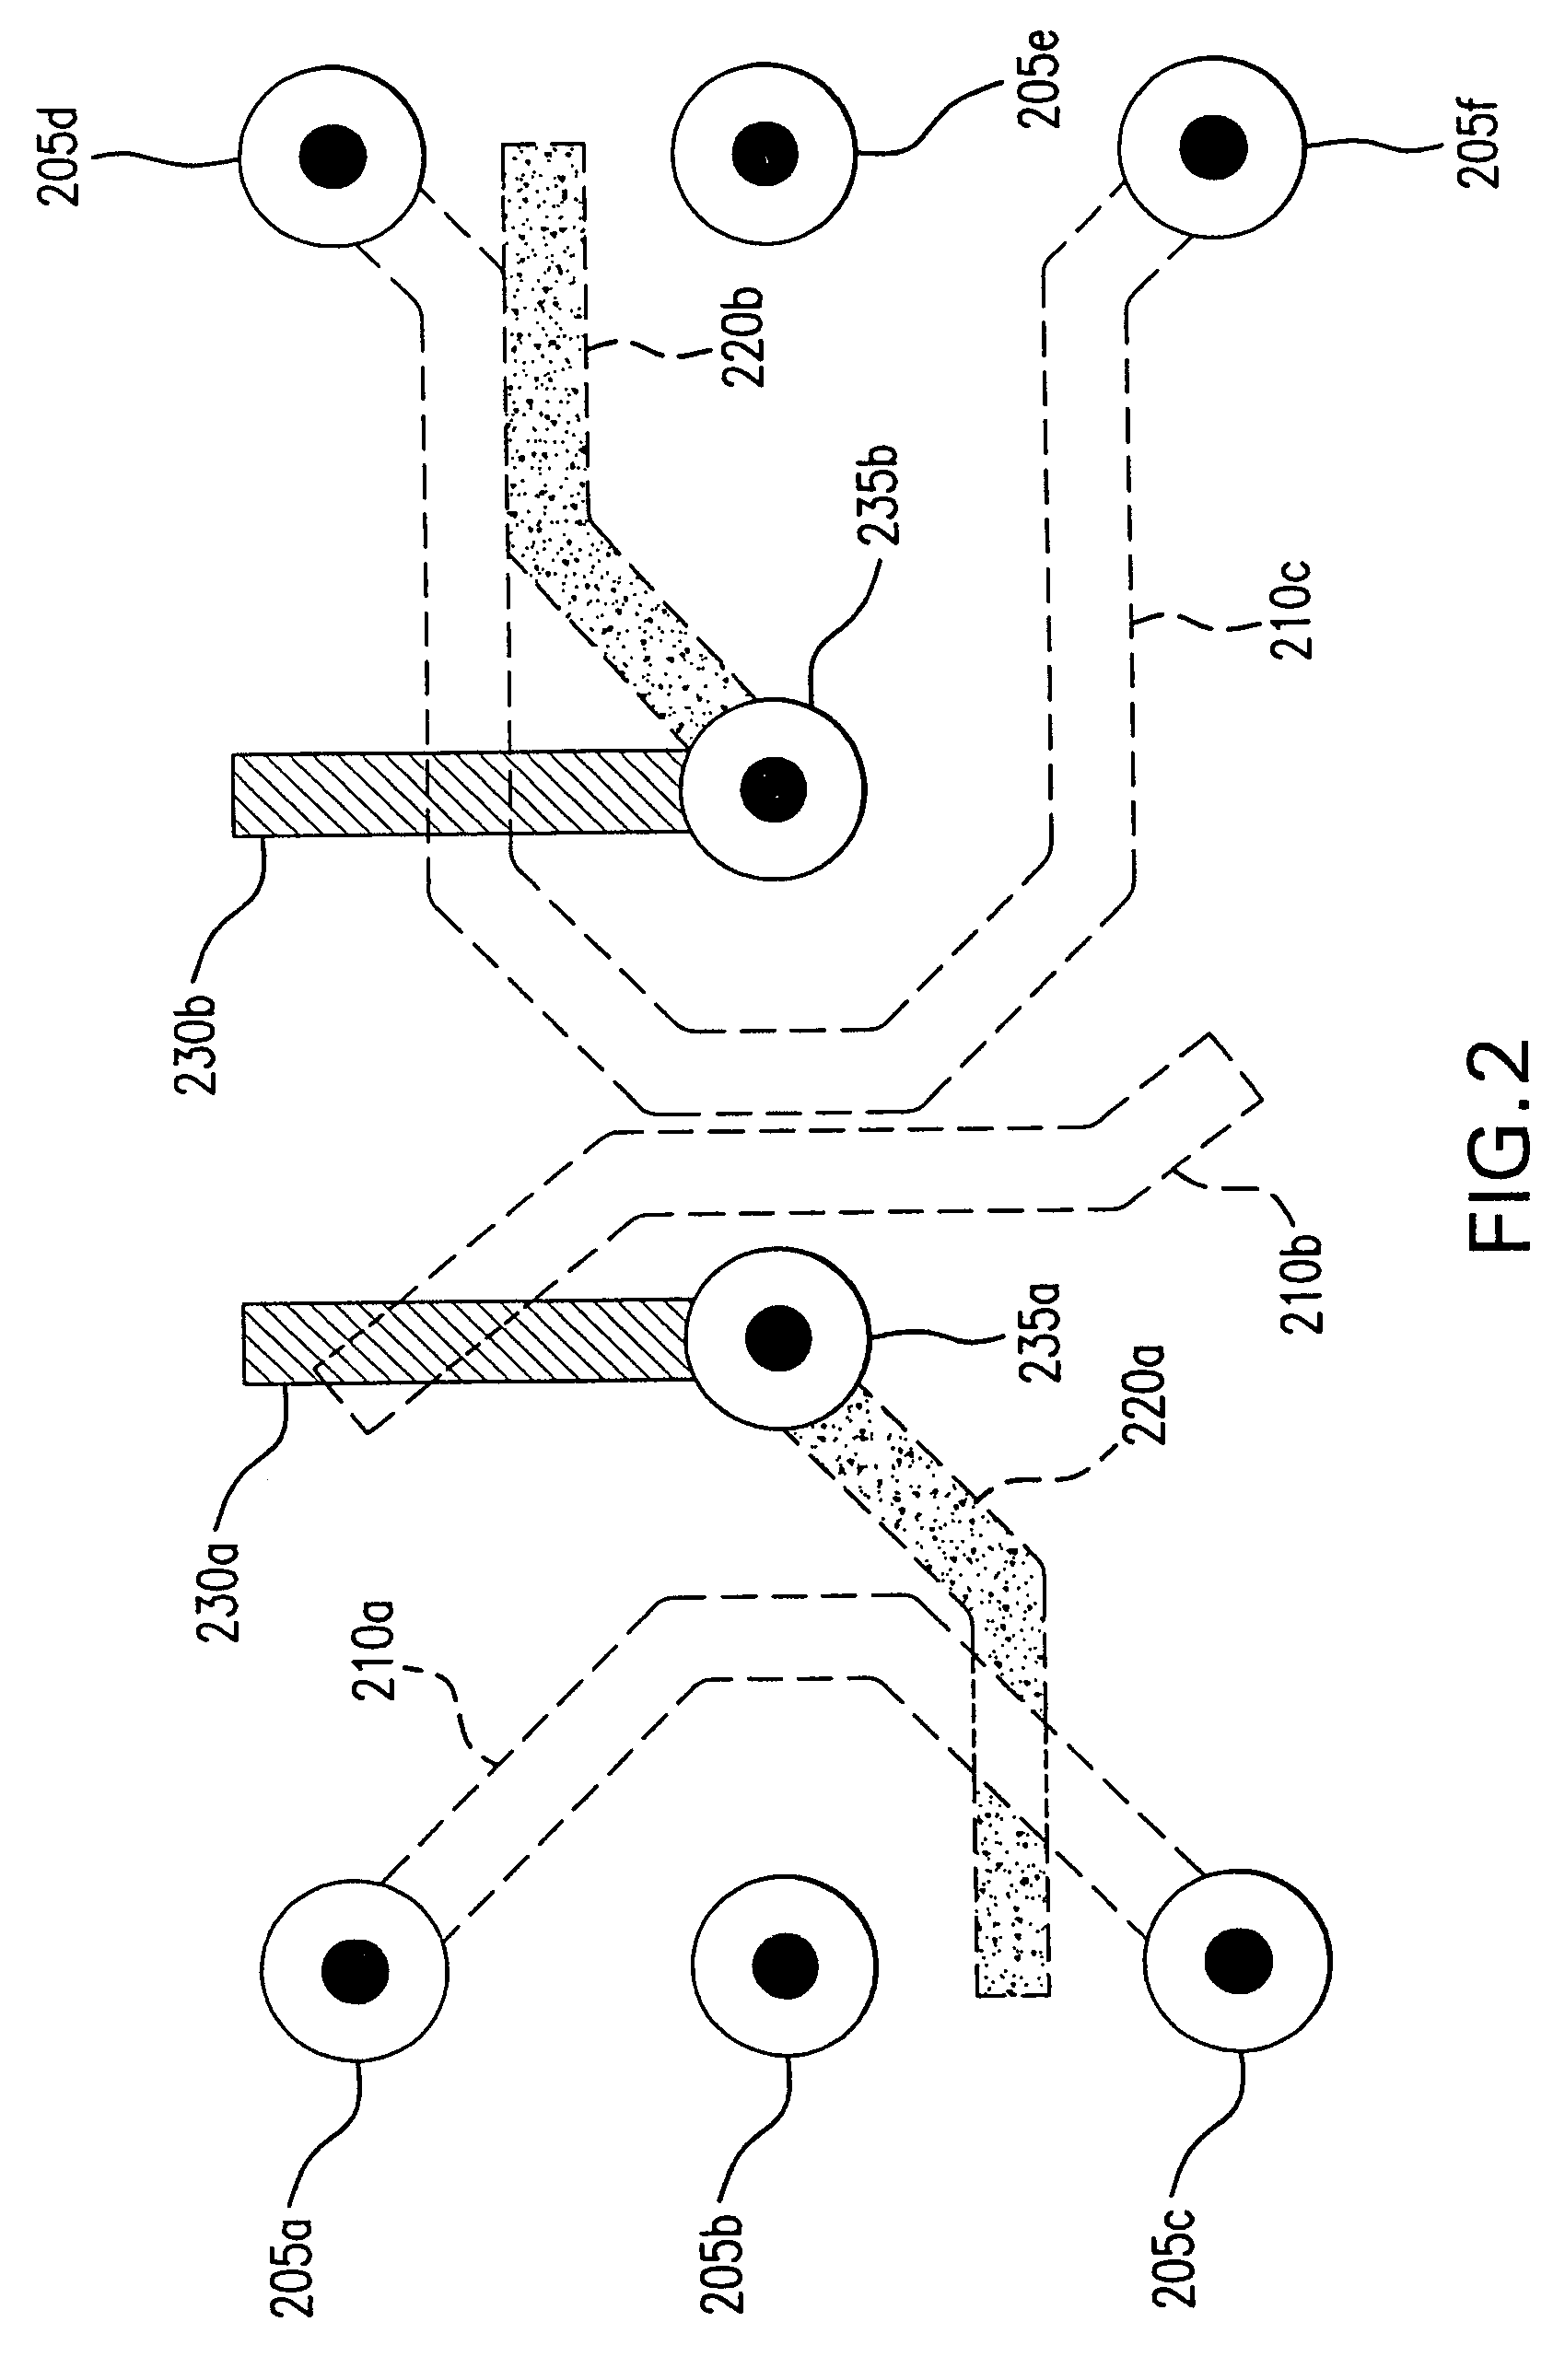 Method for resolving overloads in autorouting physical interconnections